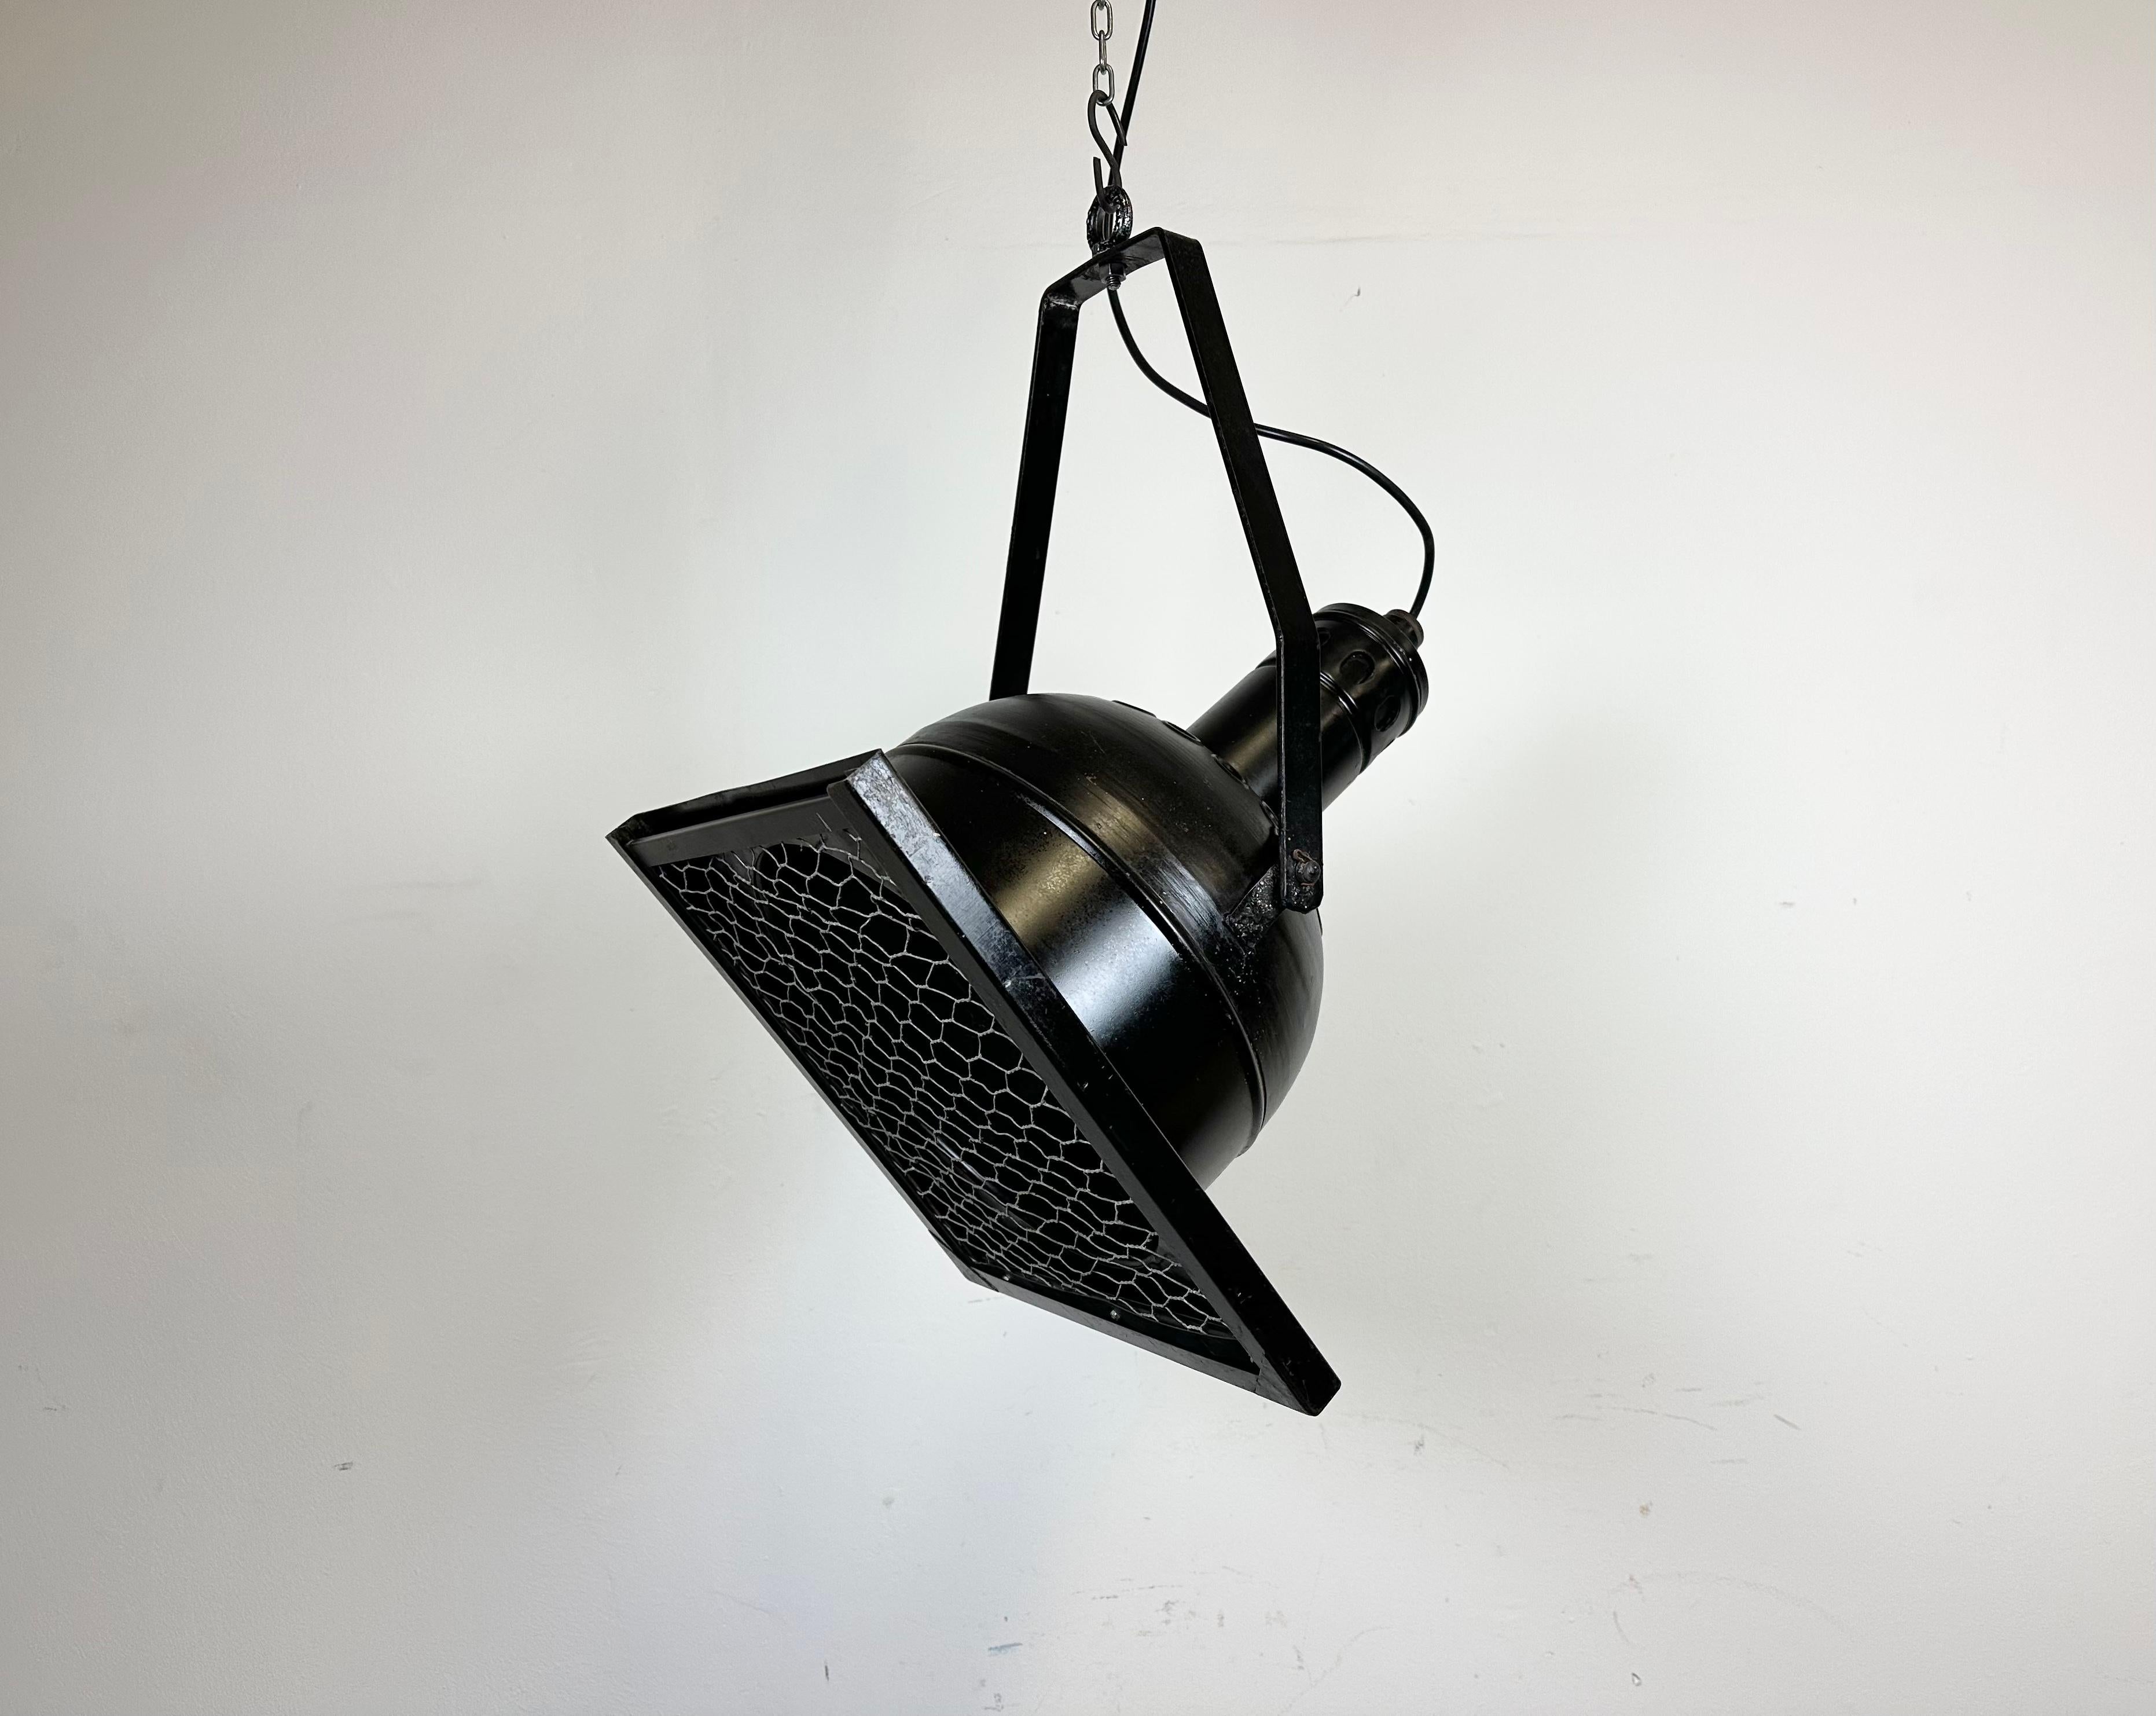 - Vintage theatre spotlight made by in former Czechoslovakia during the 1950s 
- It features a black metal body with silver interior and iron grid.
- Adjustable angle
- The porcelain socket requires E27/ E26 lightbulbs 
- New wire
-The height of the